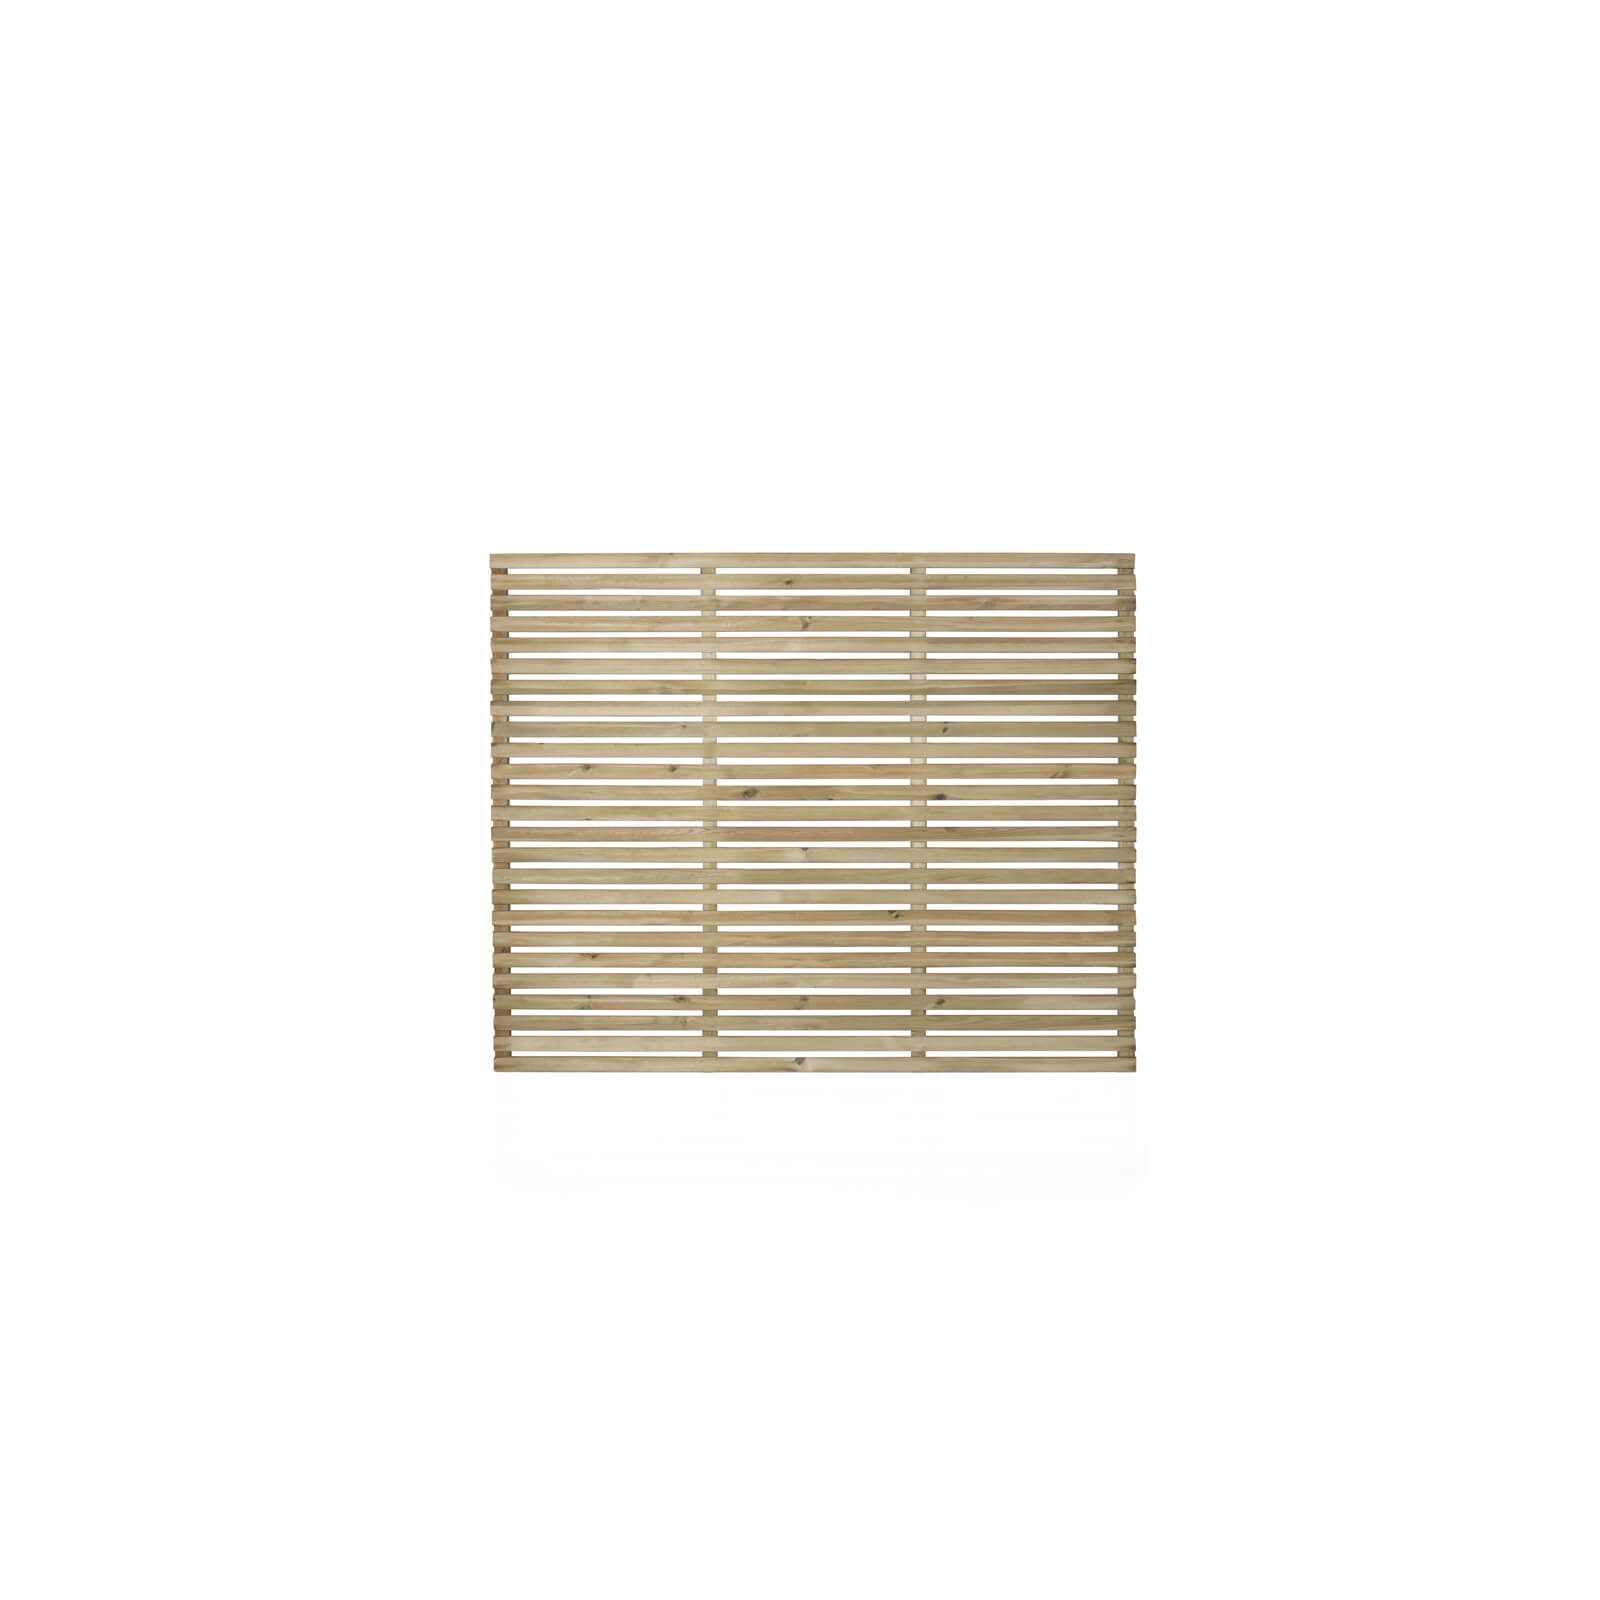 6ft x 5ft (1.8m x 1.5m) Pressure Treated Contemporary Slatted Fence Panel - Pack of 4